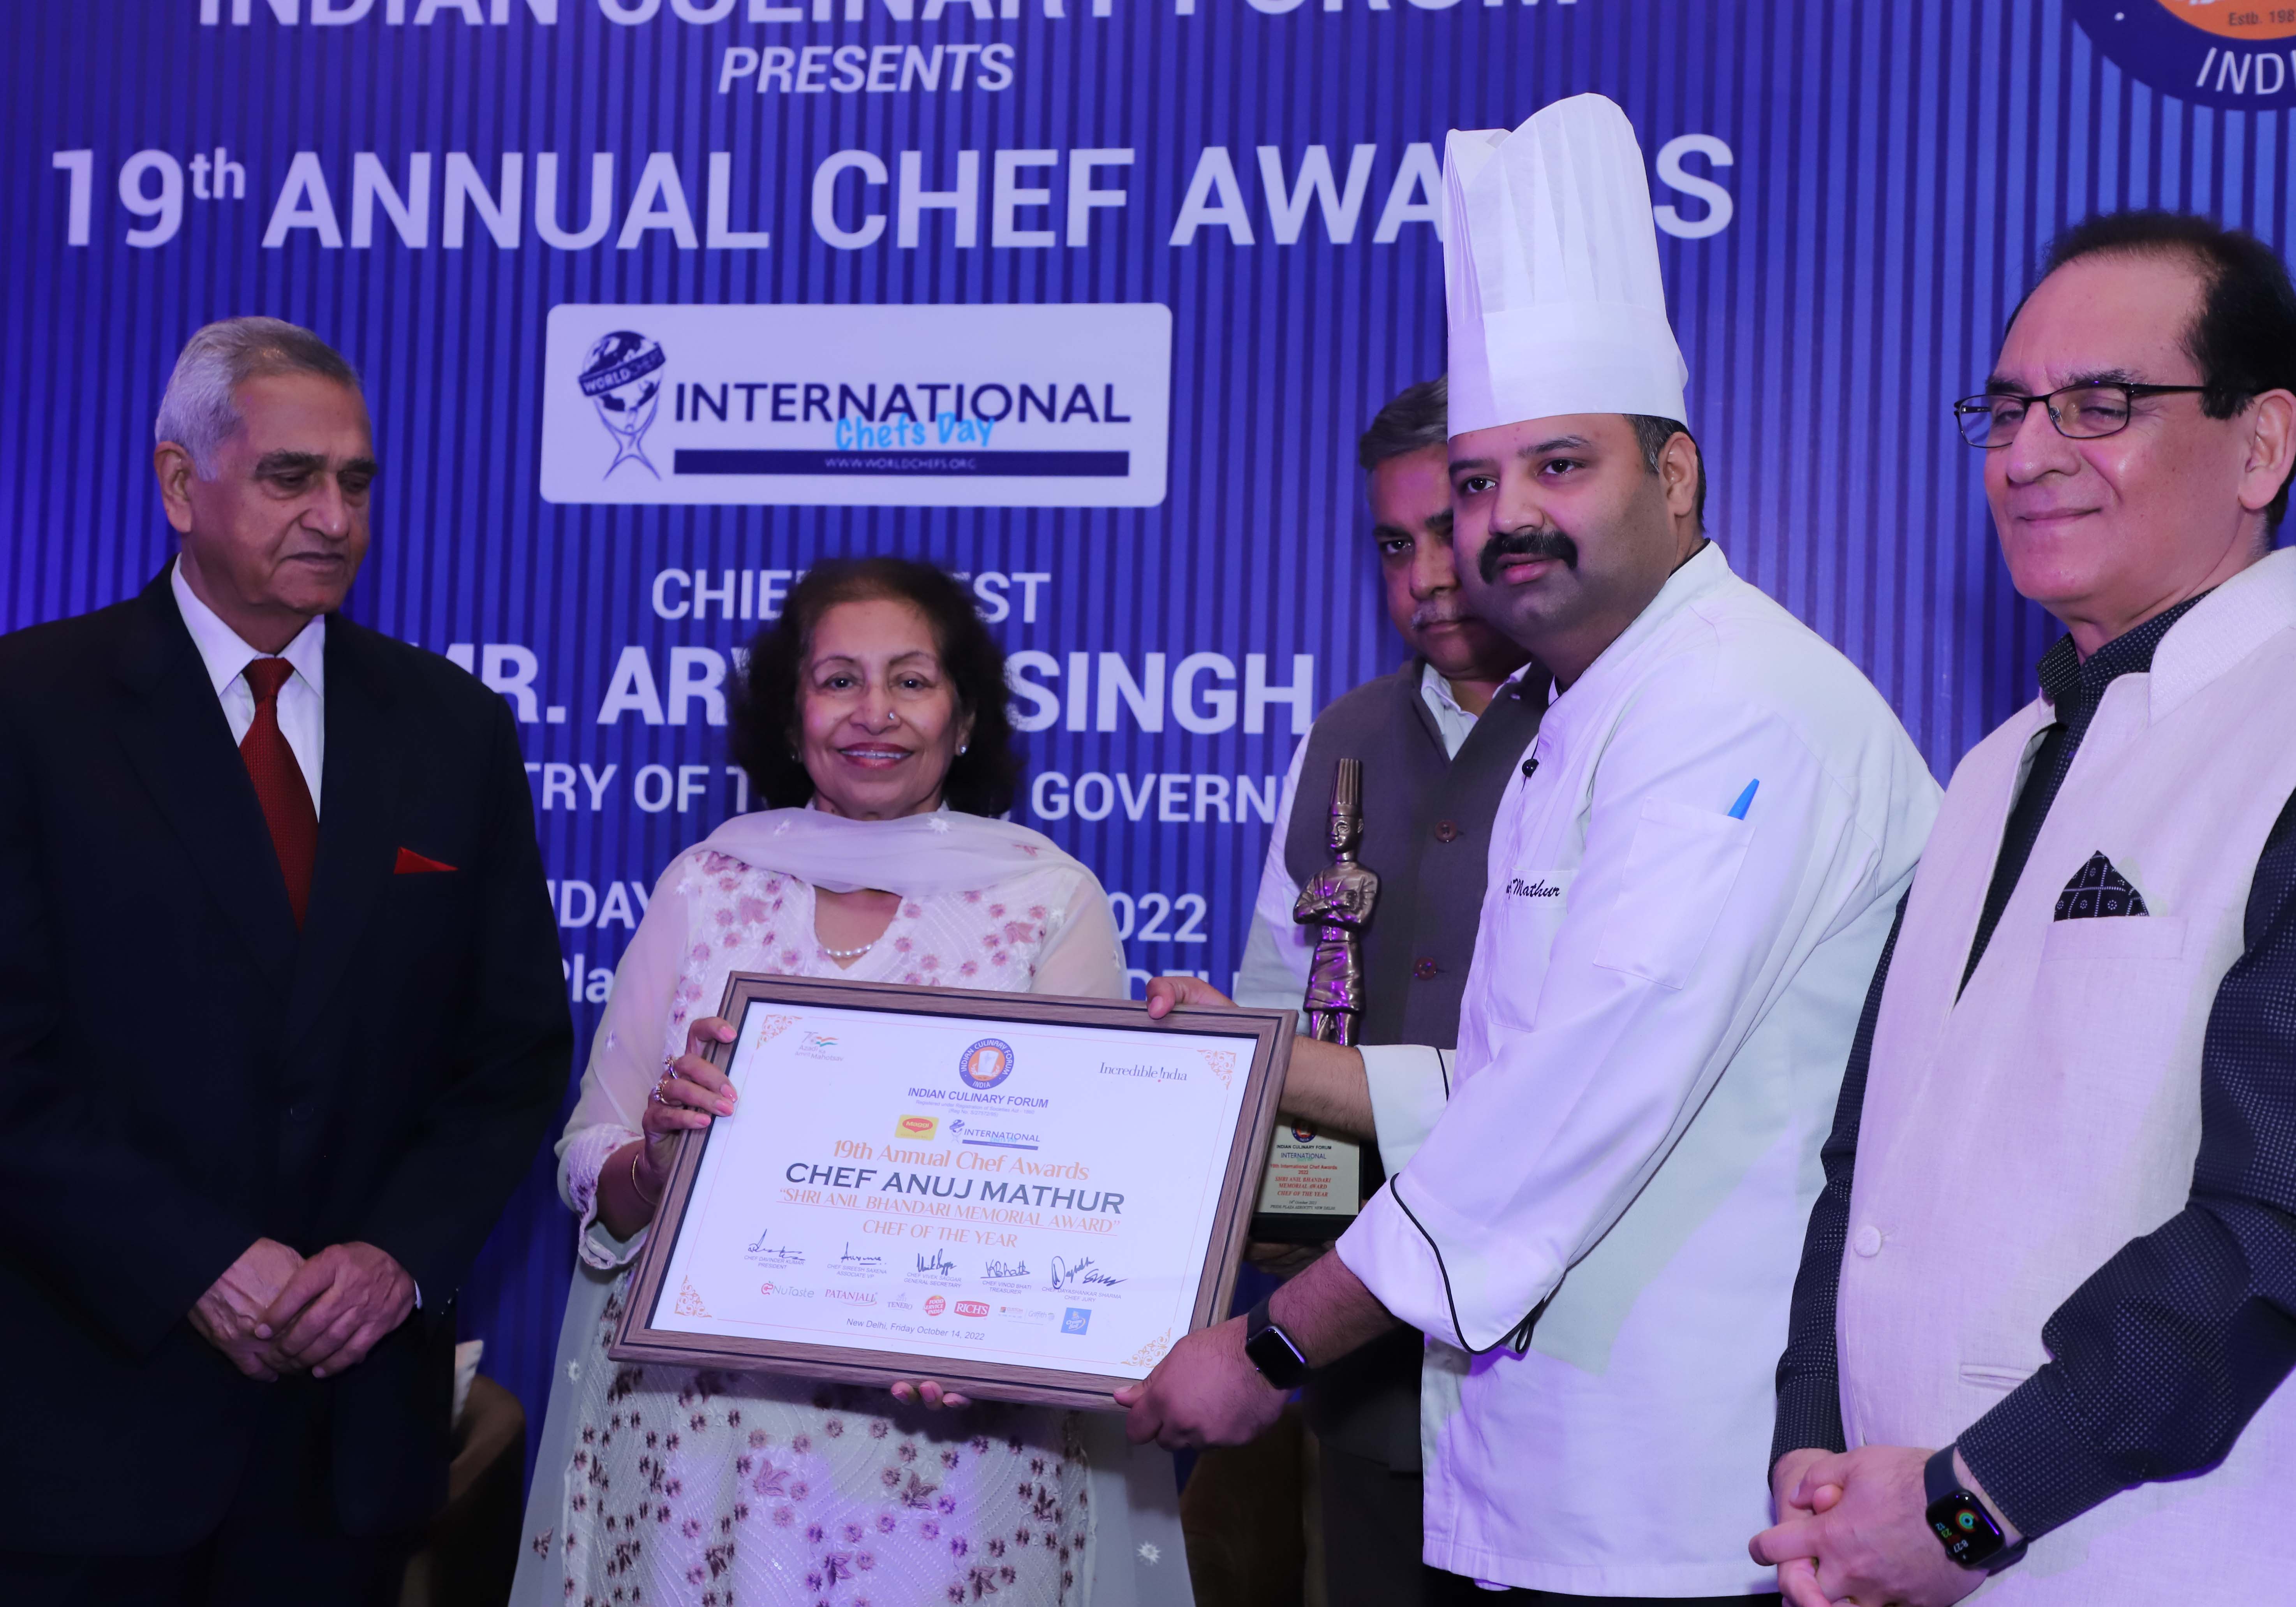 Winner of Chef of the Year chef Anuj Mathur